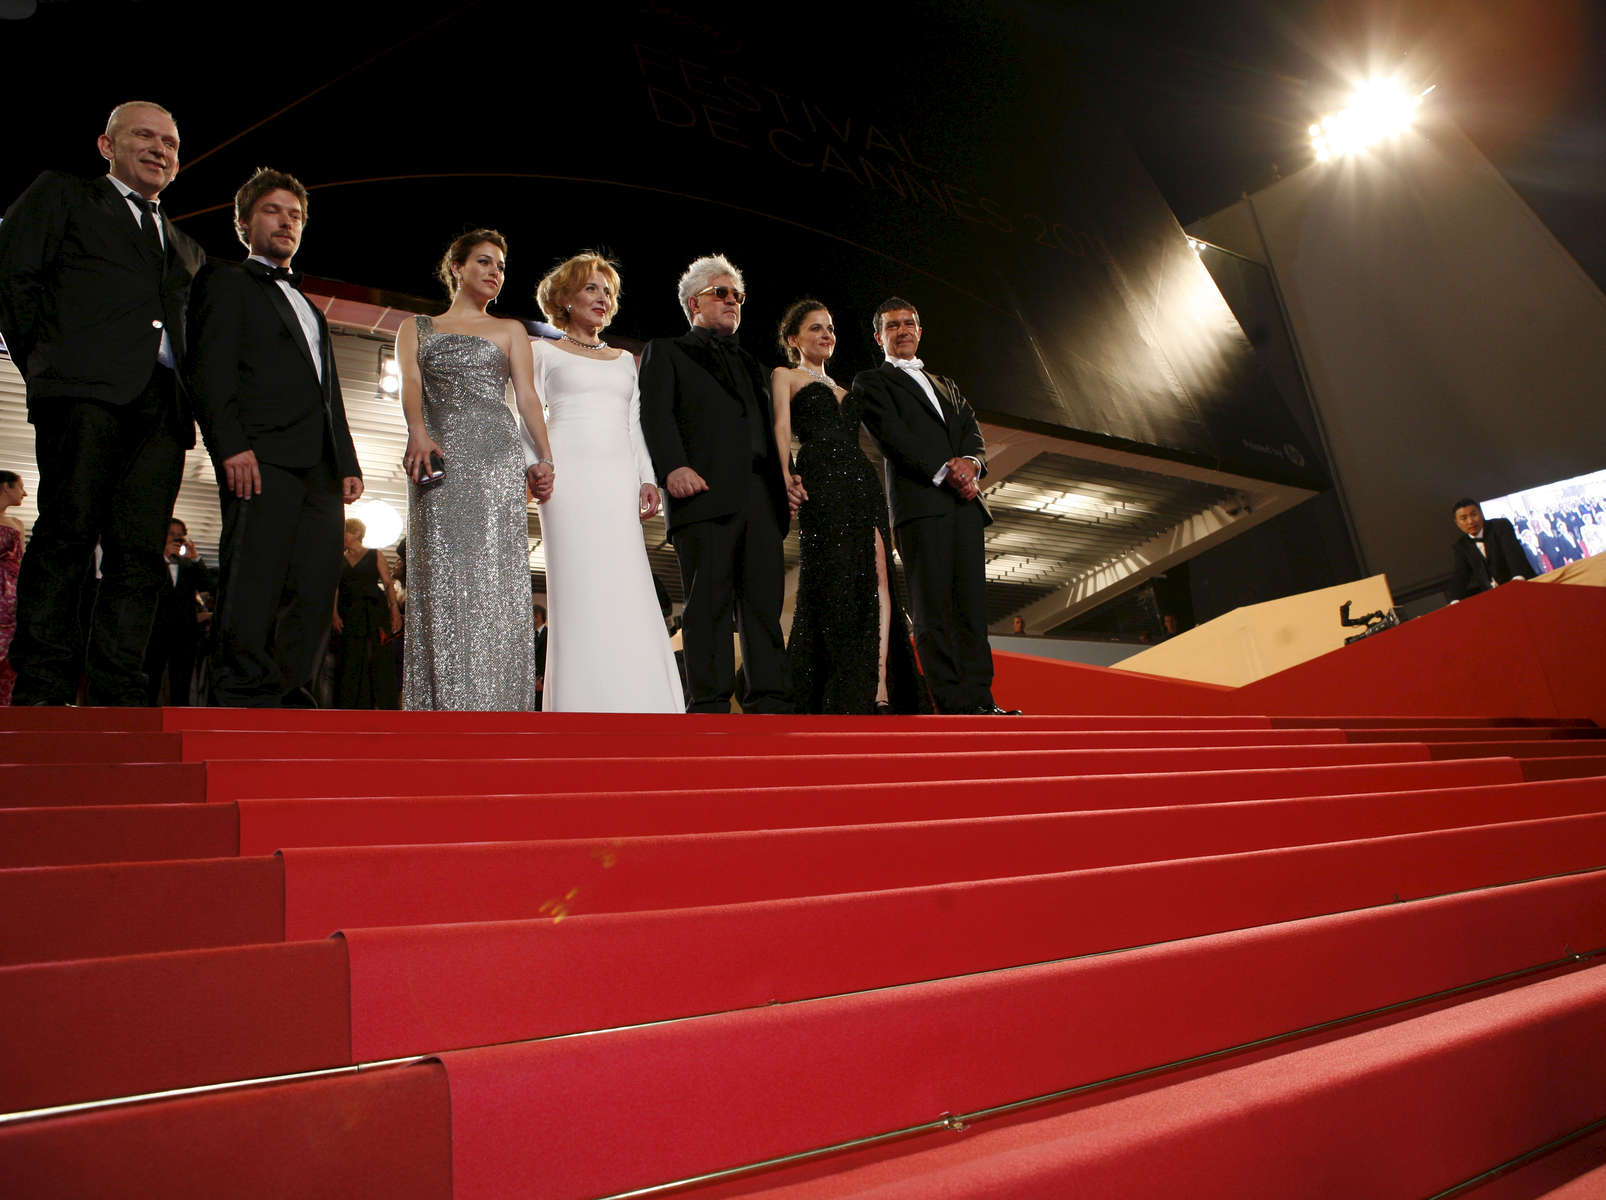 (L-R) Jean Paul Gaultier, actor Jan Cornet, actress Elena Anaya, actress Marisa Paredes, director Pedro Almodovar, actress Blanca Suarez and actor Antonio Banderas, present 'The Skin I Live In' during the Cannes Film Festival at the Palais des Festivals  in Cannes, France. 